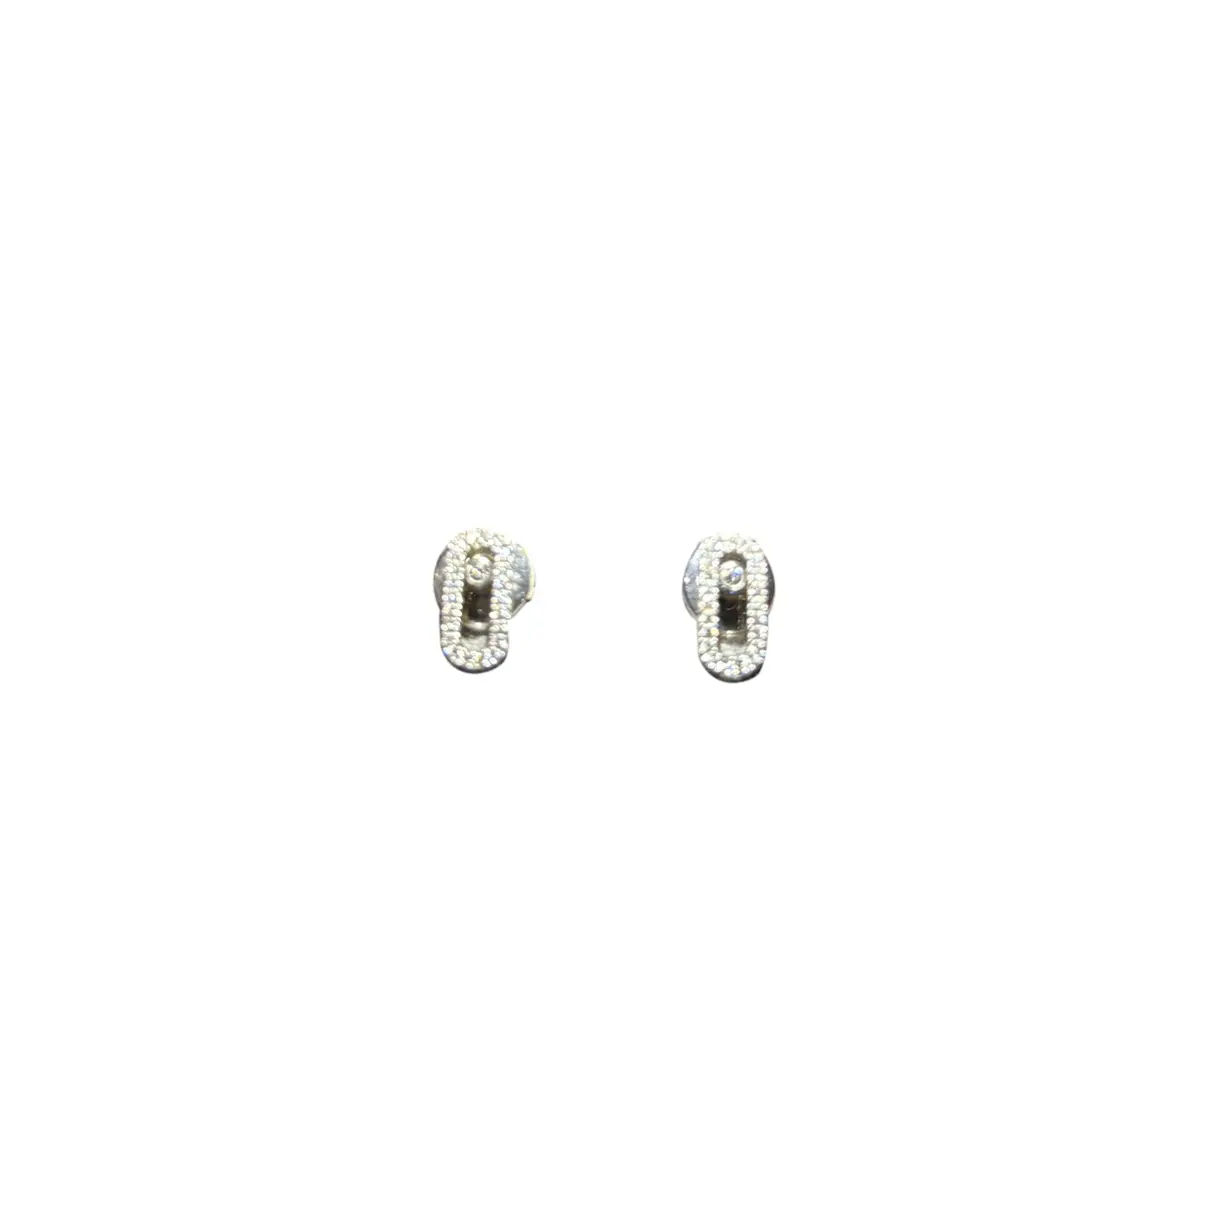 Move Classique white gold earrings